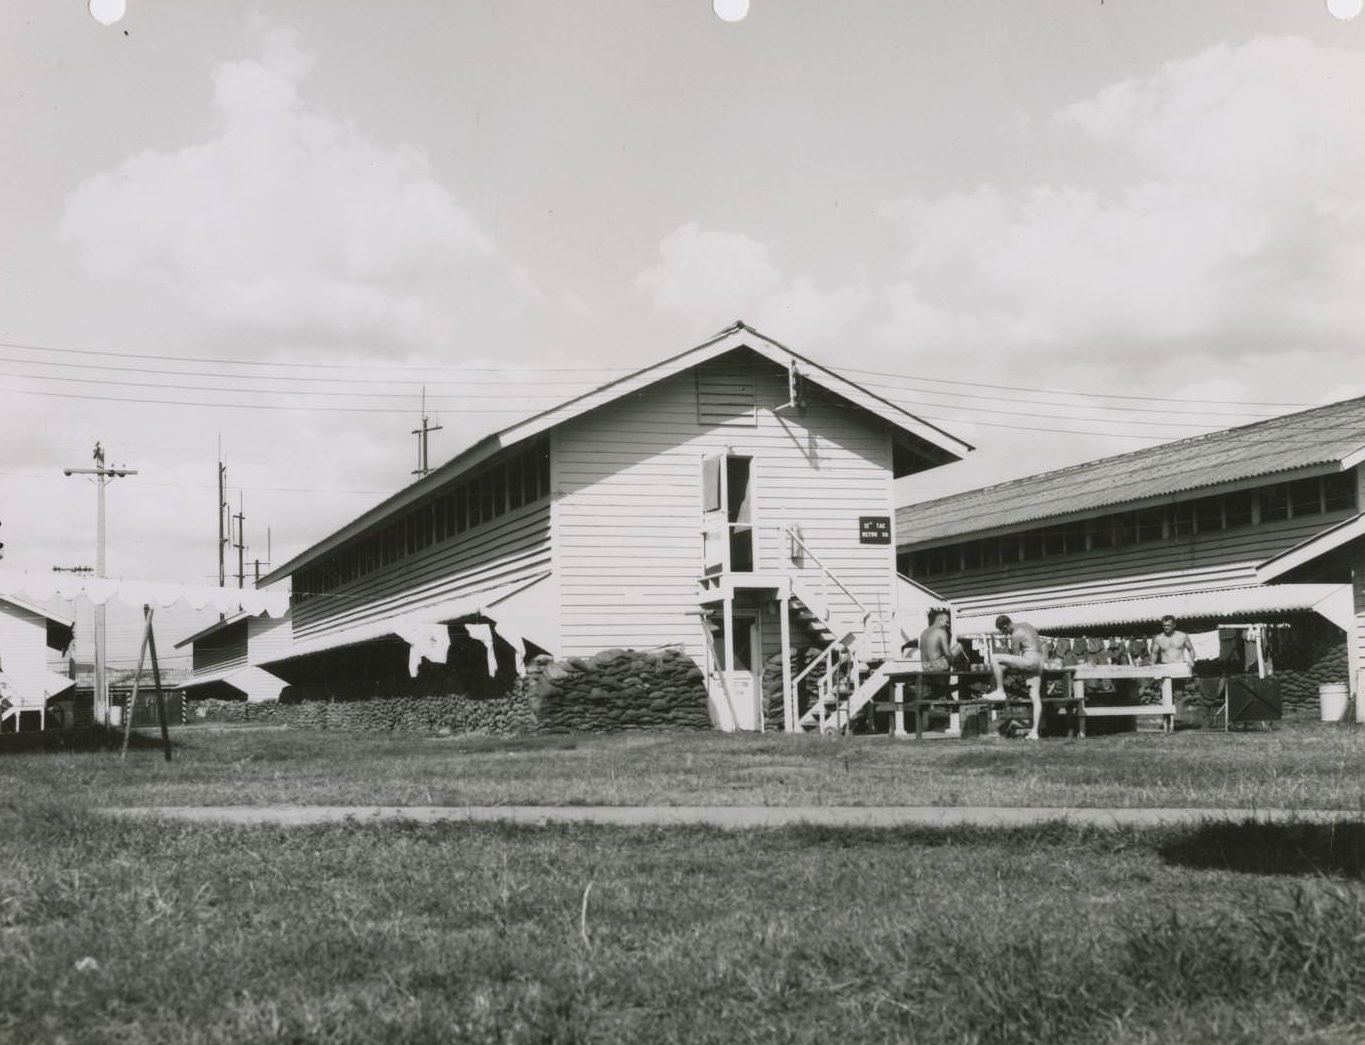 Old Men's Barracks at the Bergstrom Air Force Base, 1970. There is a line of laundry between houses to the left, and men sit at a picnic table to the right.